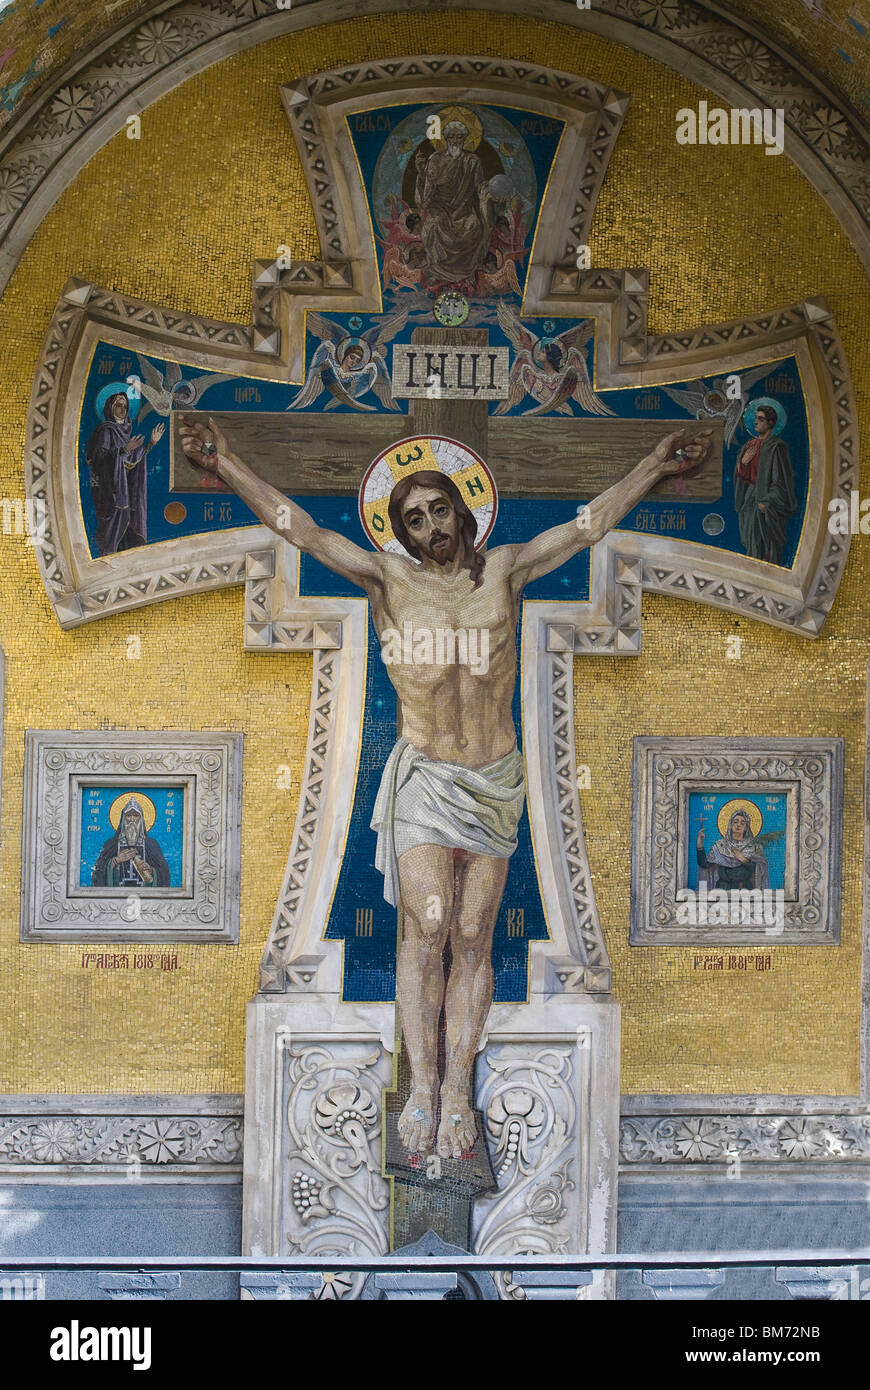 Jesus Christ on the cross. Mosaic orthodox icon on the facade of the famous cathedral of the Savior on Spilled Blood Stock Photo